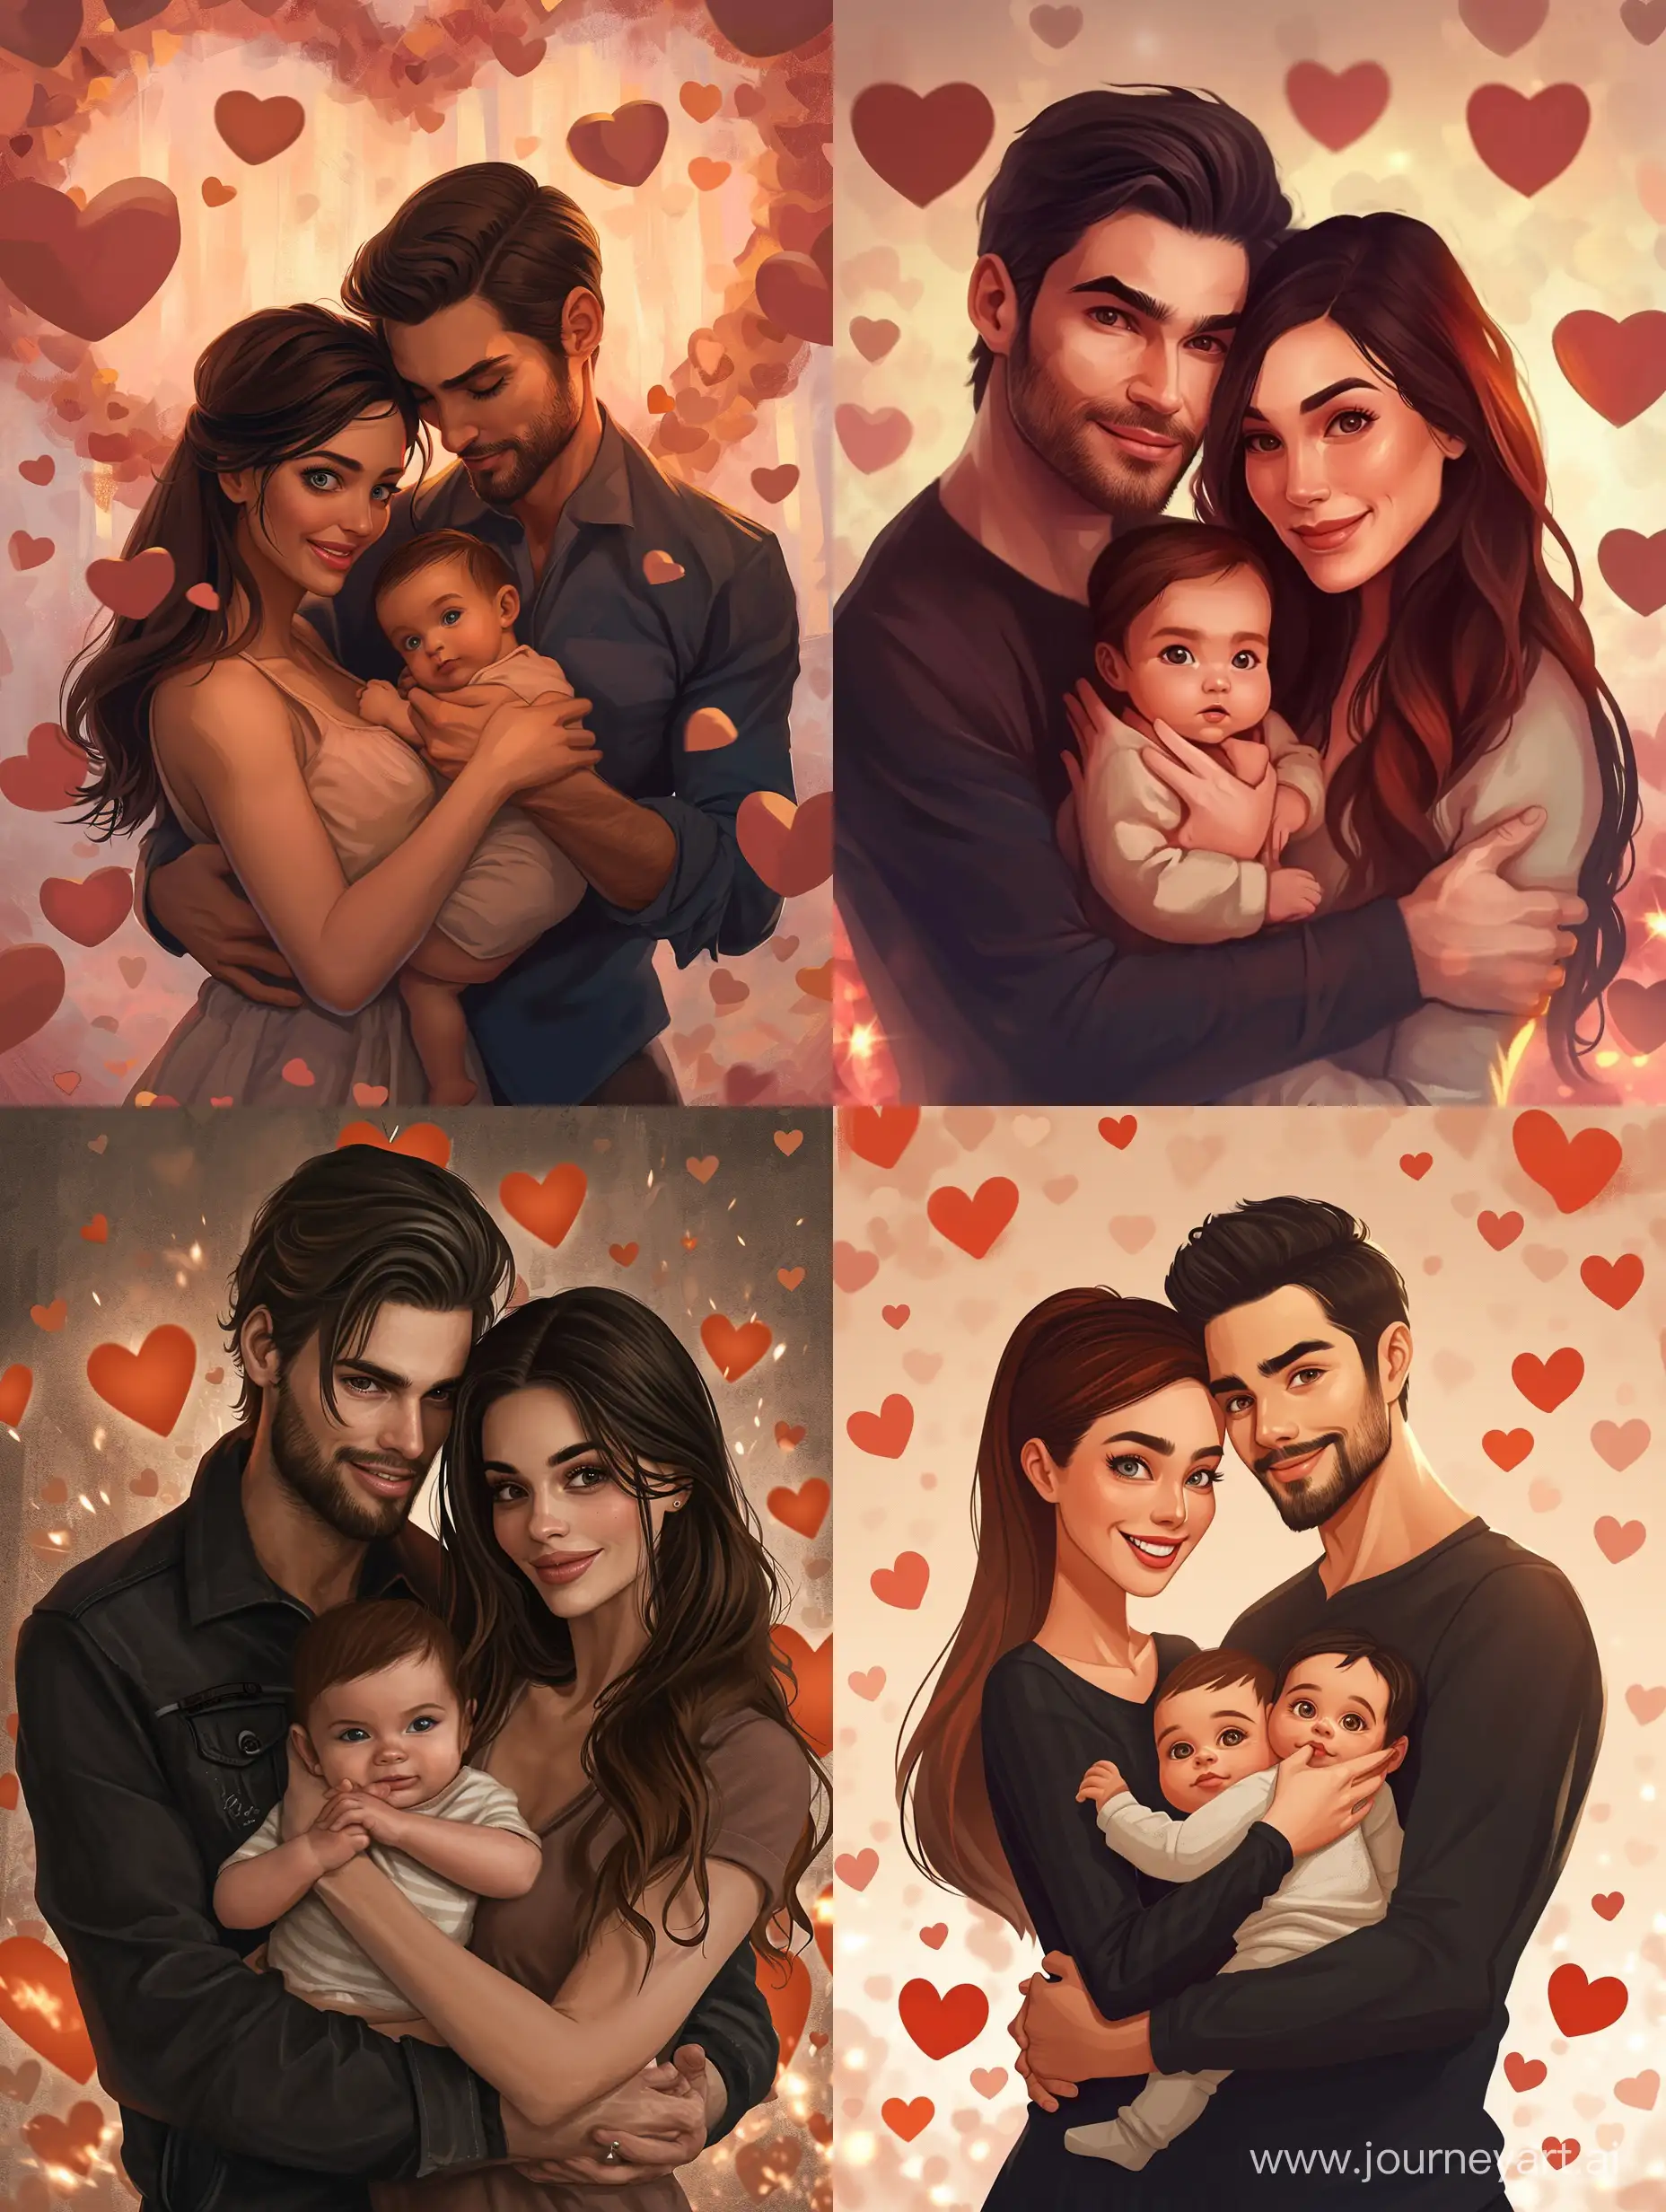 Adorable-Family-Portrait-with-Hearts-Digital-Art